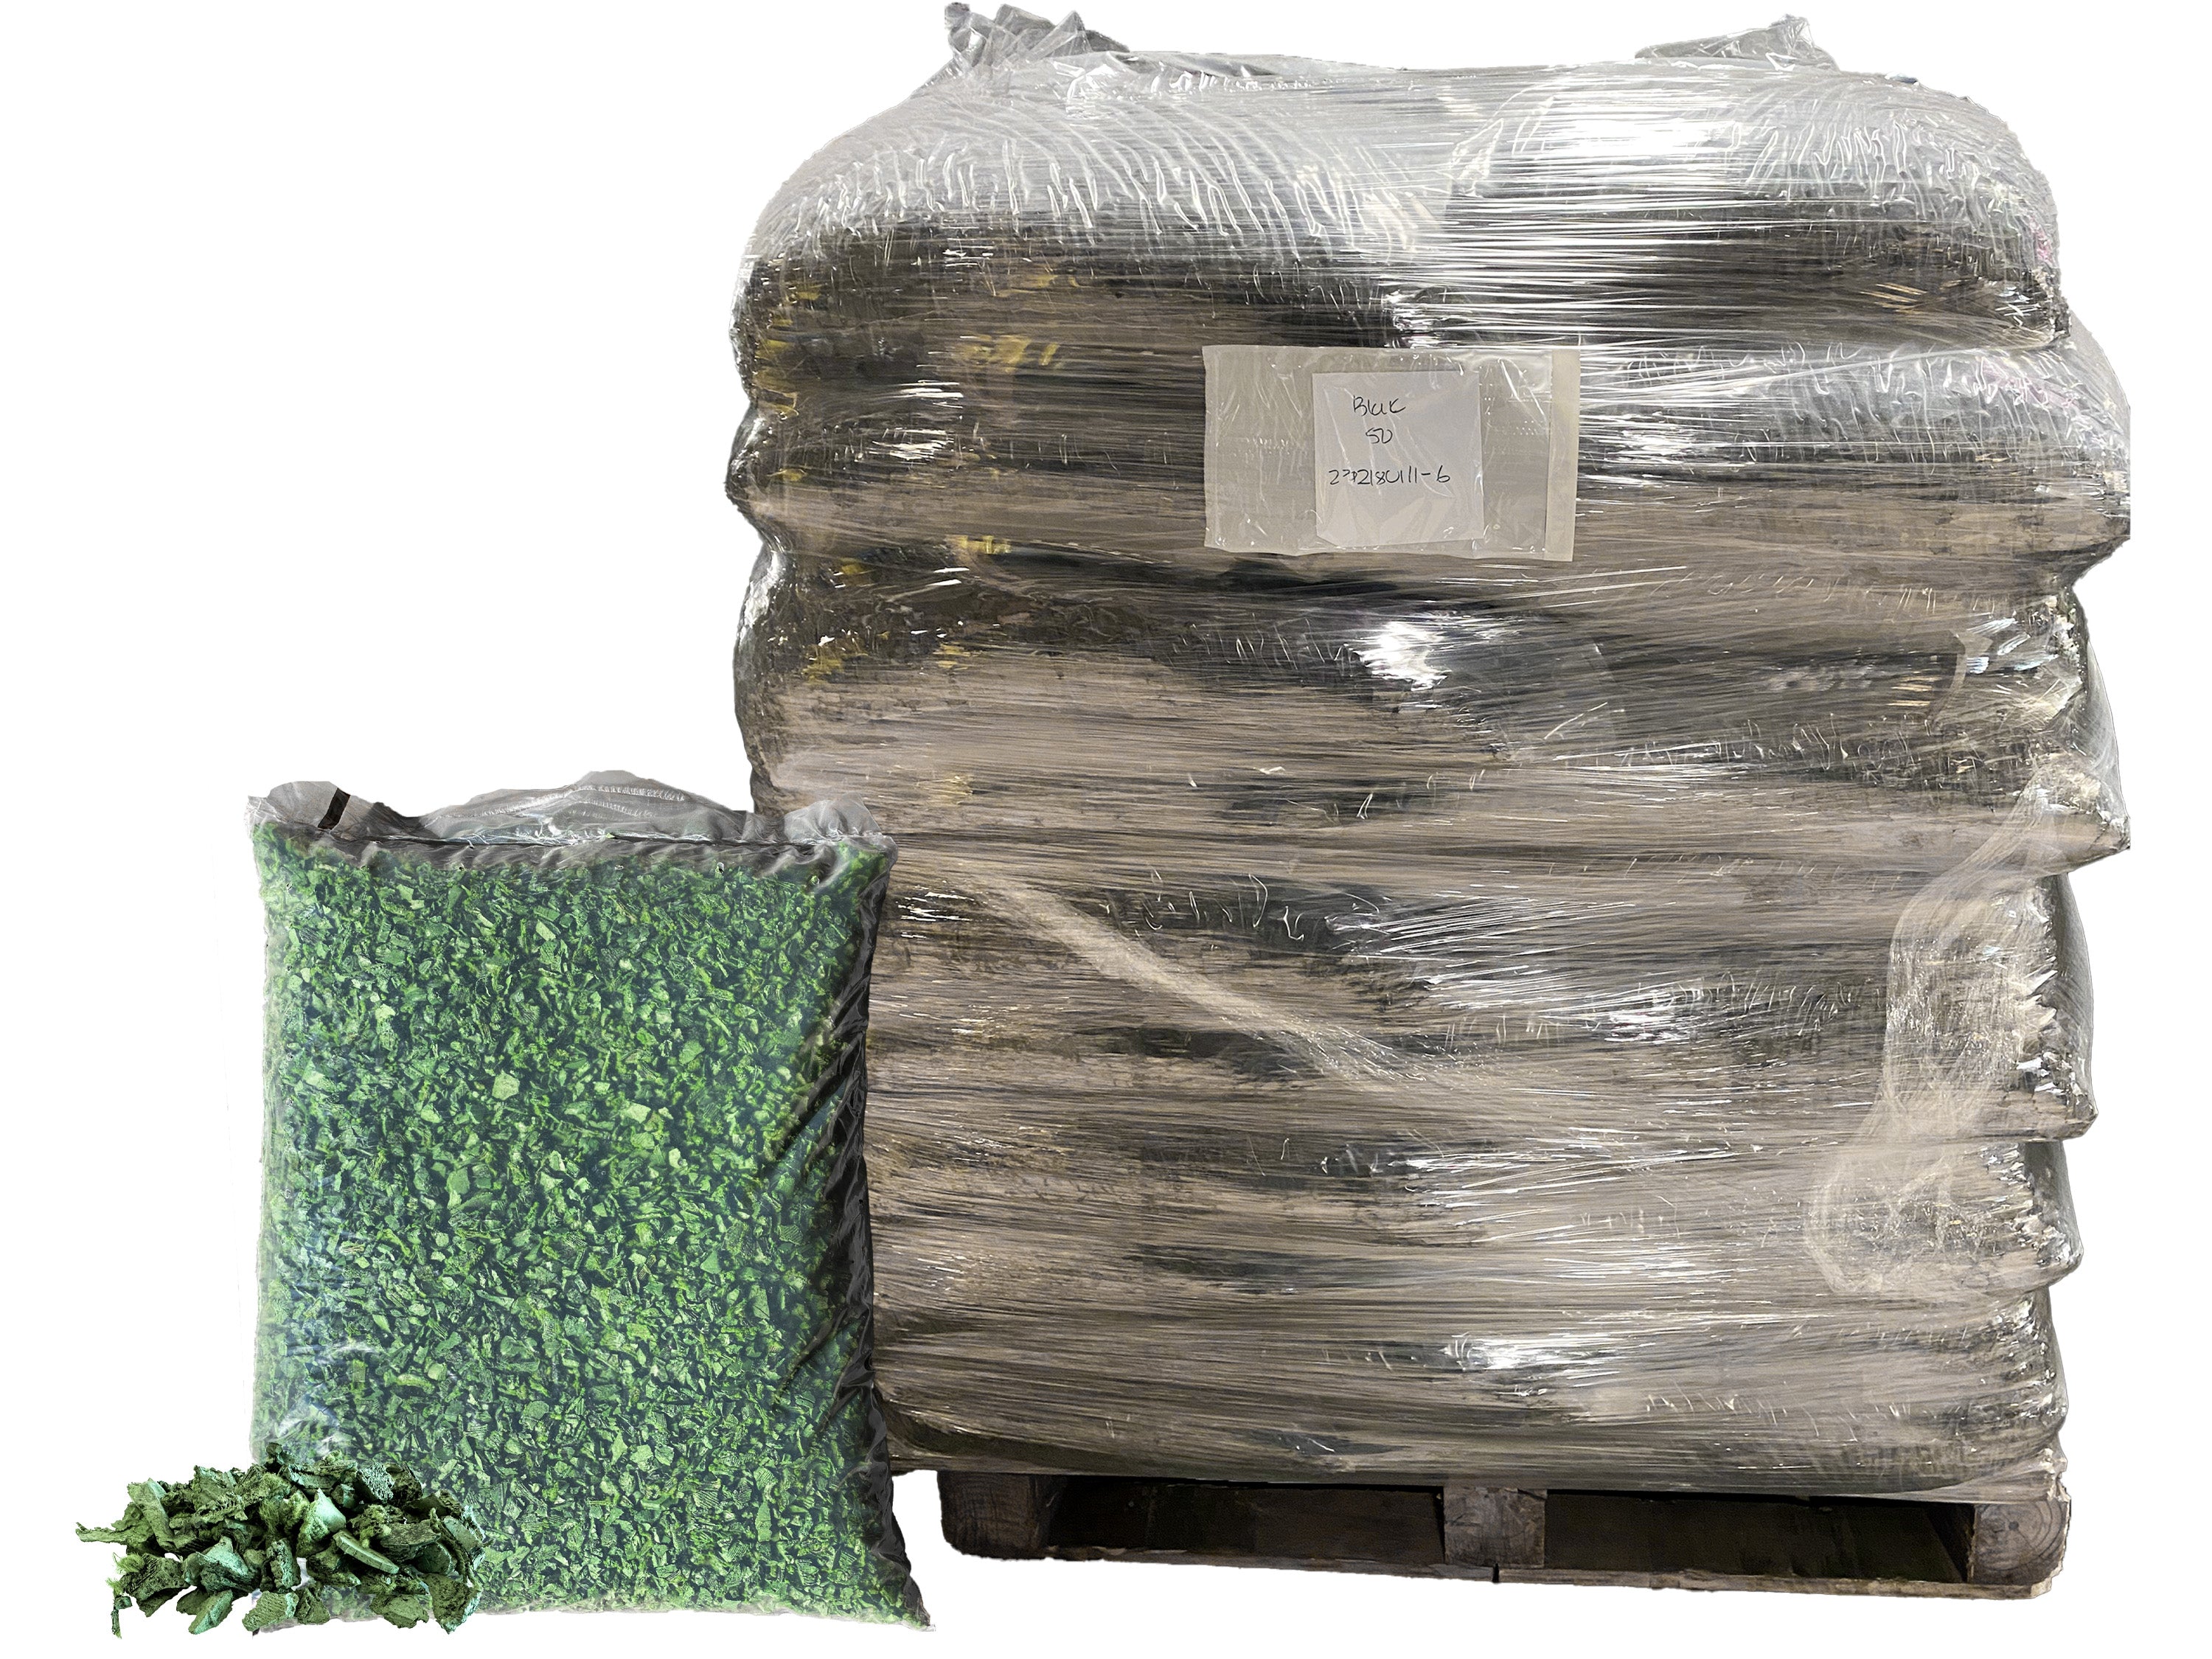 Viagrow Green Rubber Playground & Landscape Mulch, 75 cf pallet / 50 bags 1.5cf each / 2.77 Cubic Yards / 2000lbs